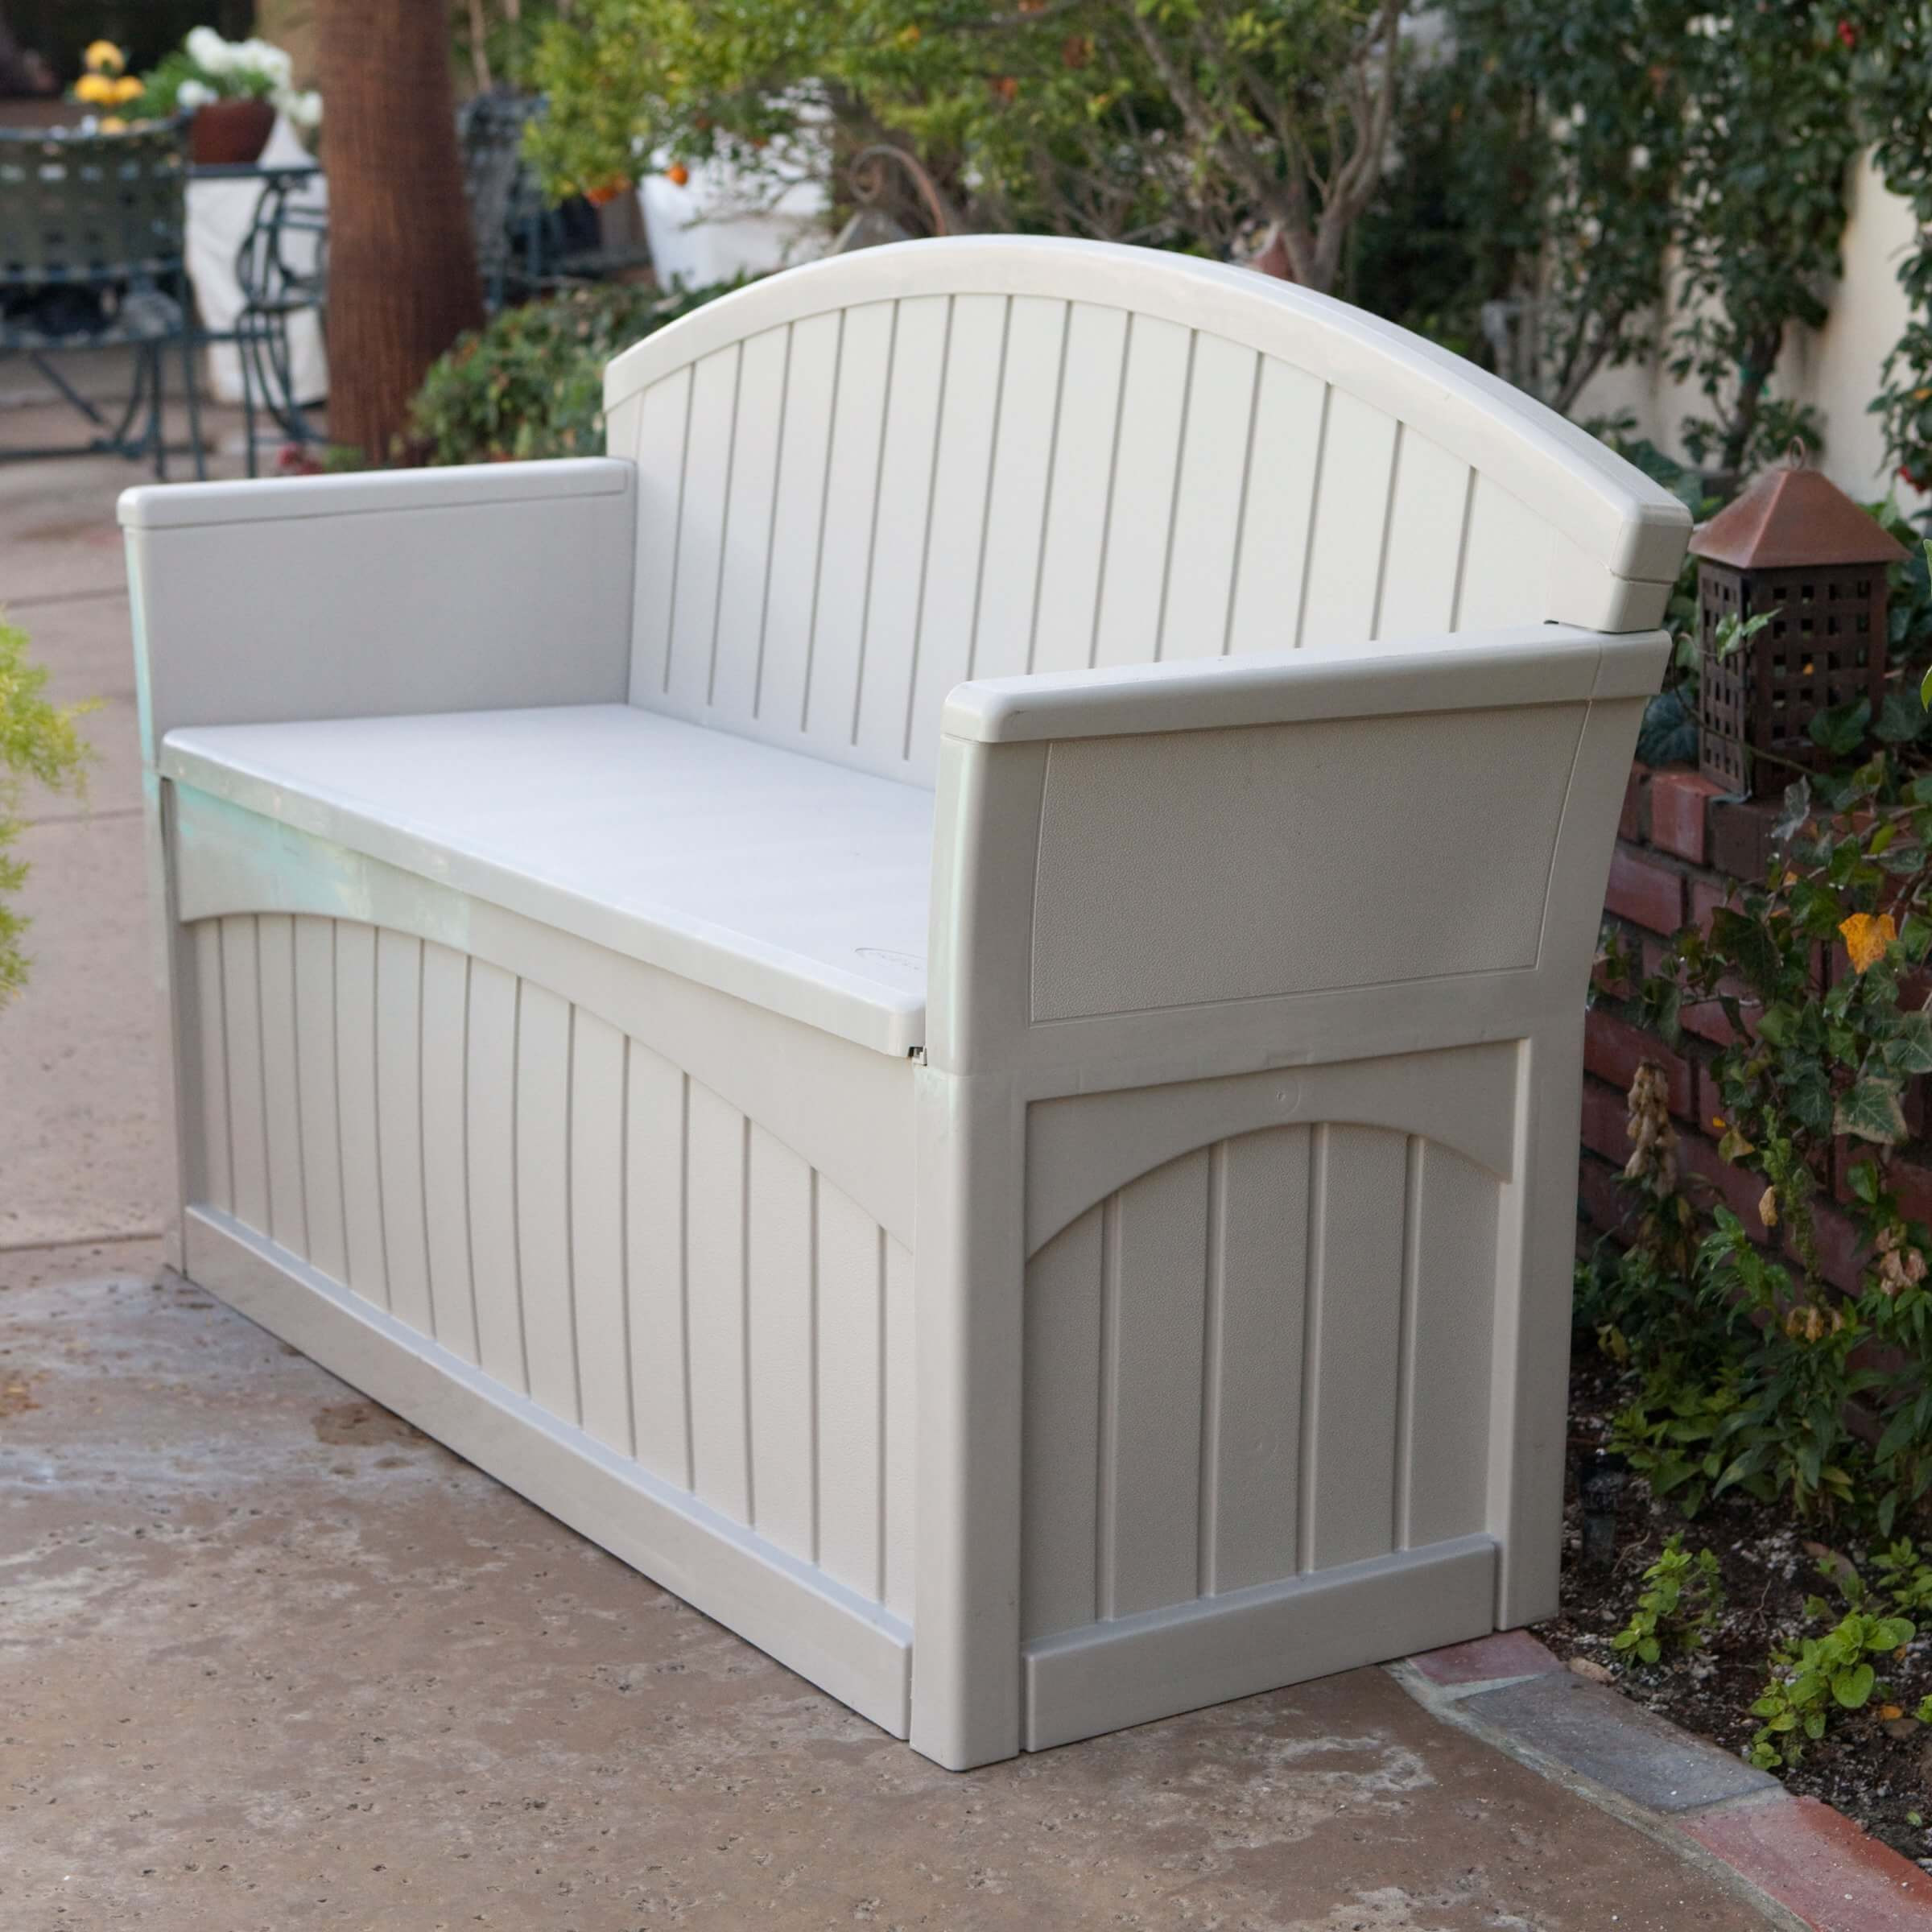 Storage Bench Outdoors
 Top 10 Types of Outdoor Deck Storage Boxes